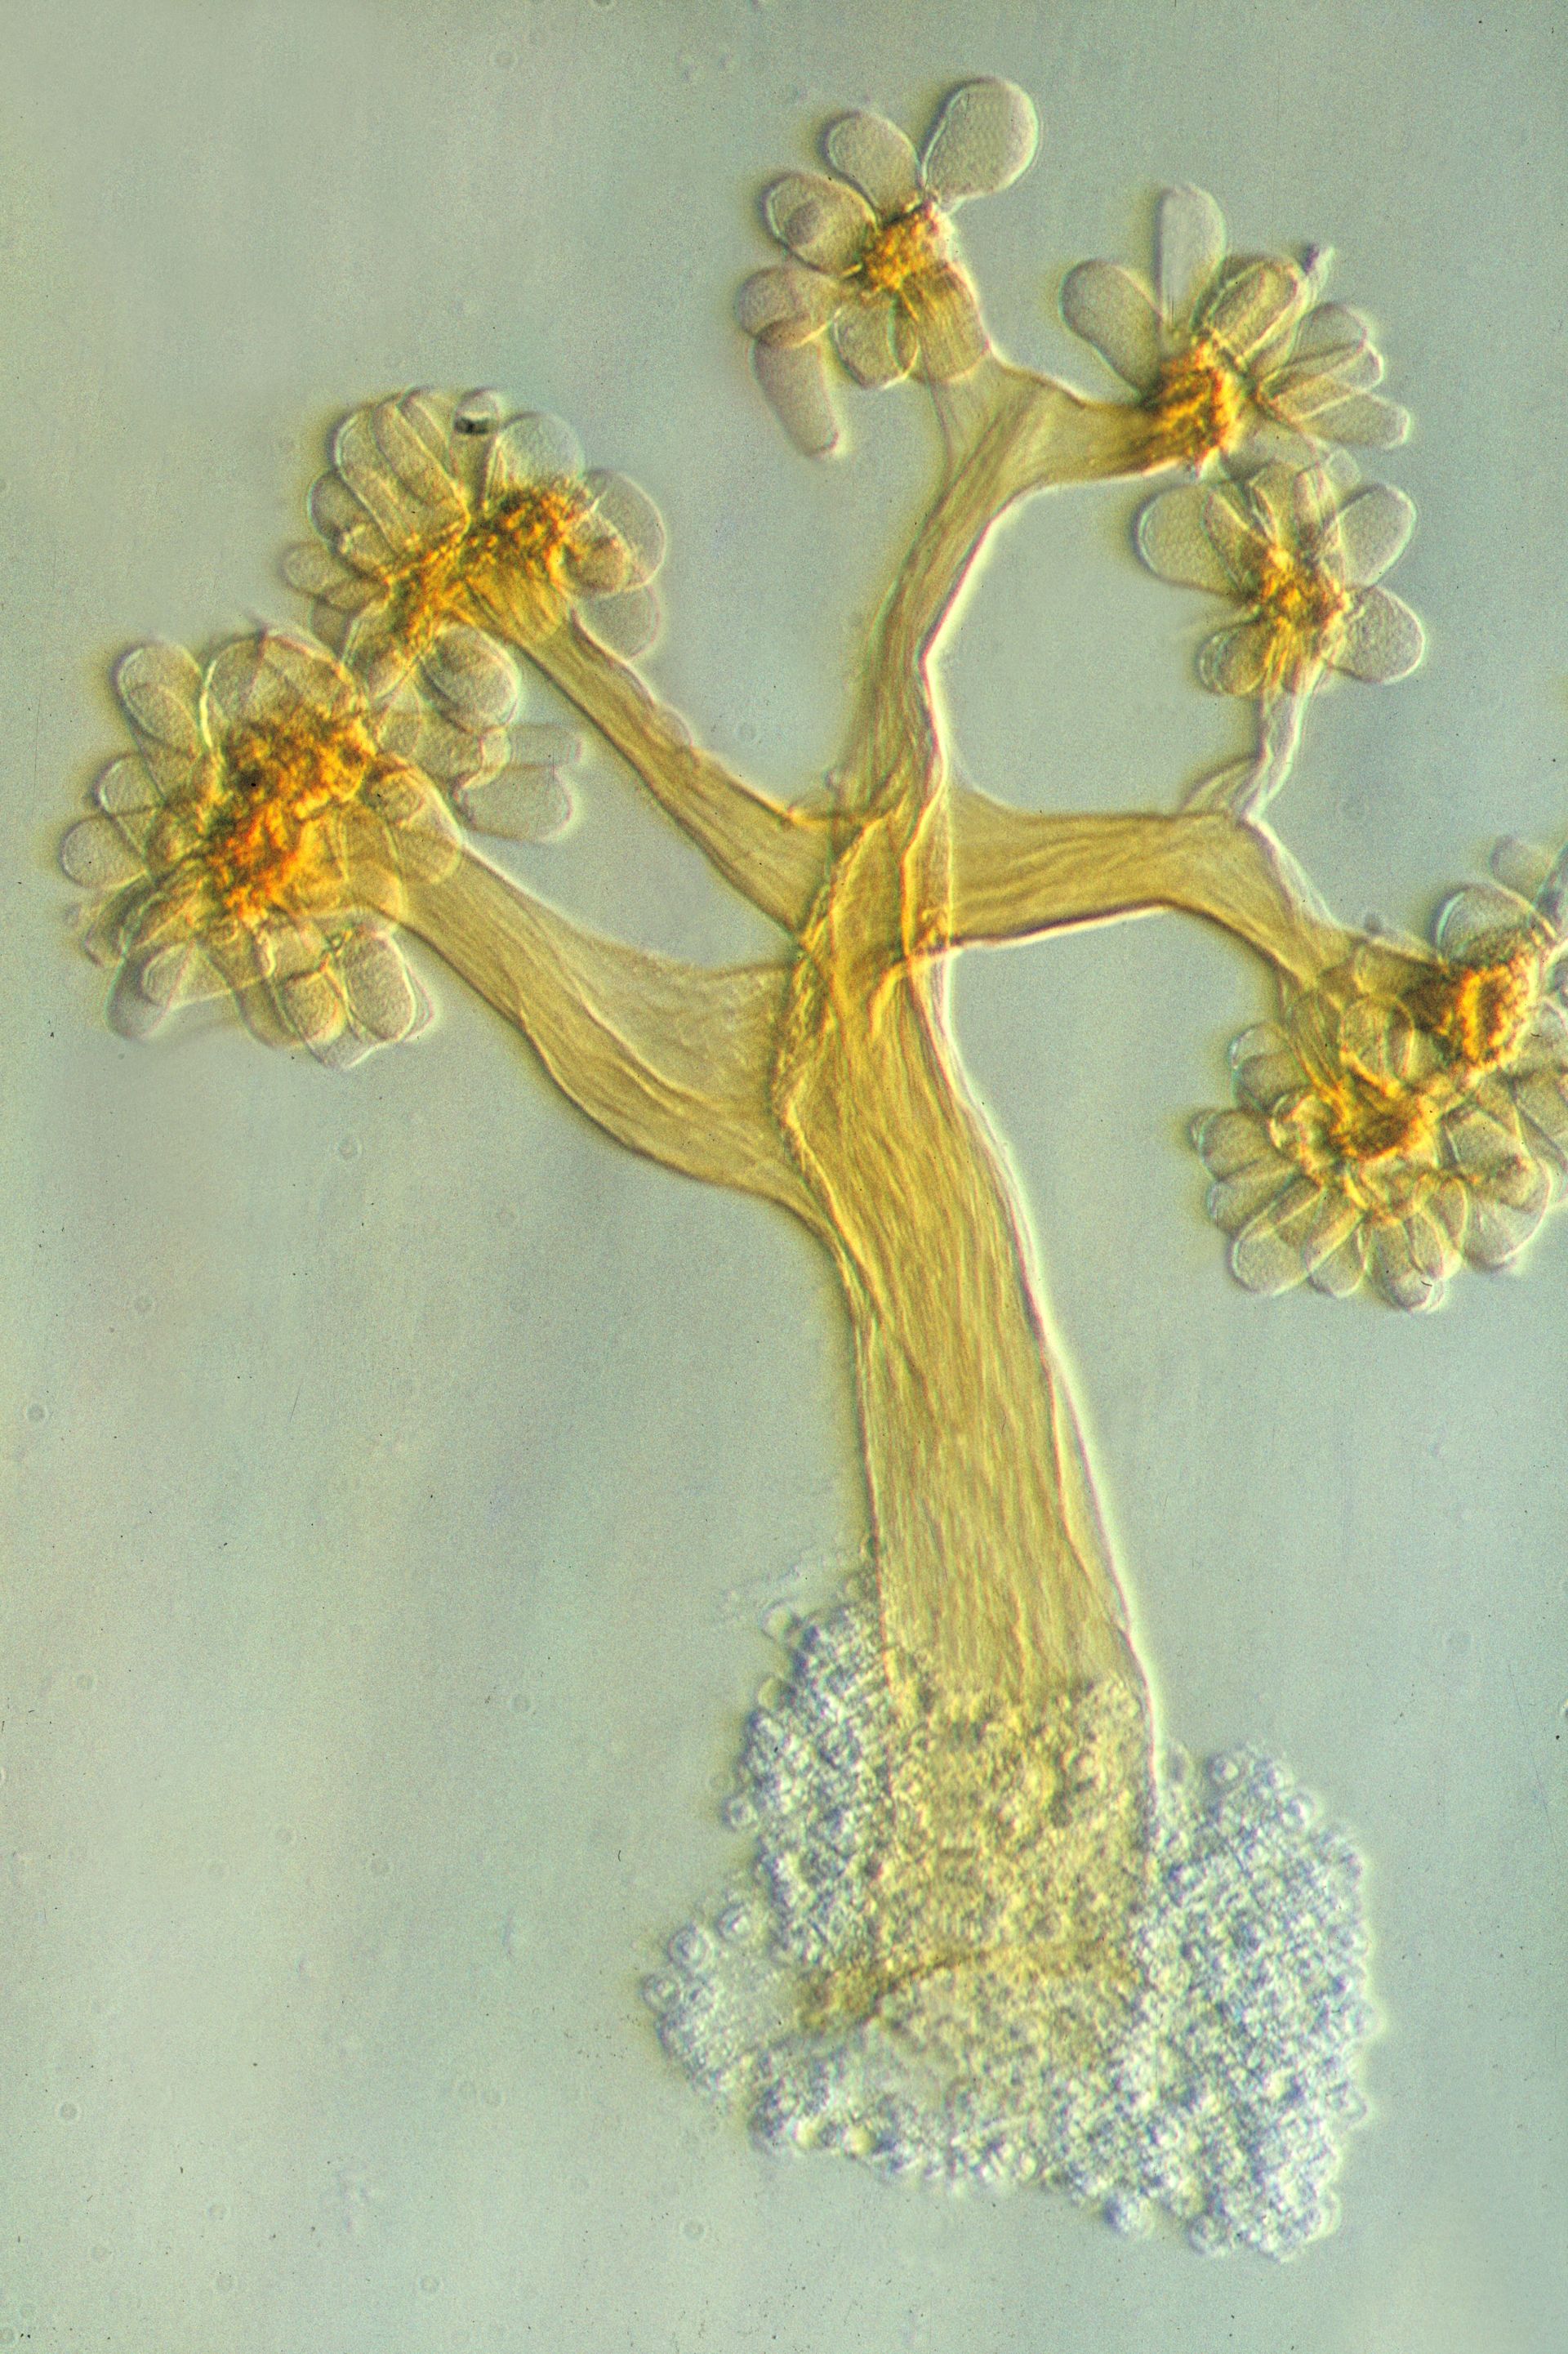 Fruiting bodies of myxobacteria under the light microscope.